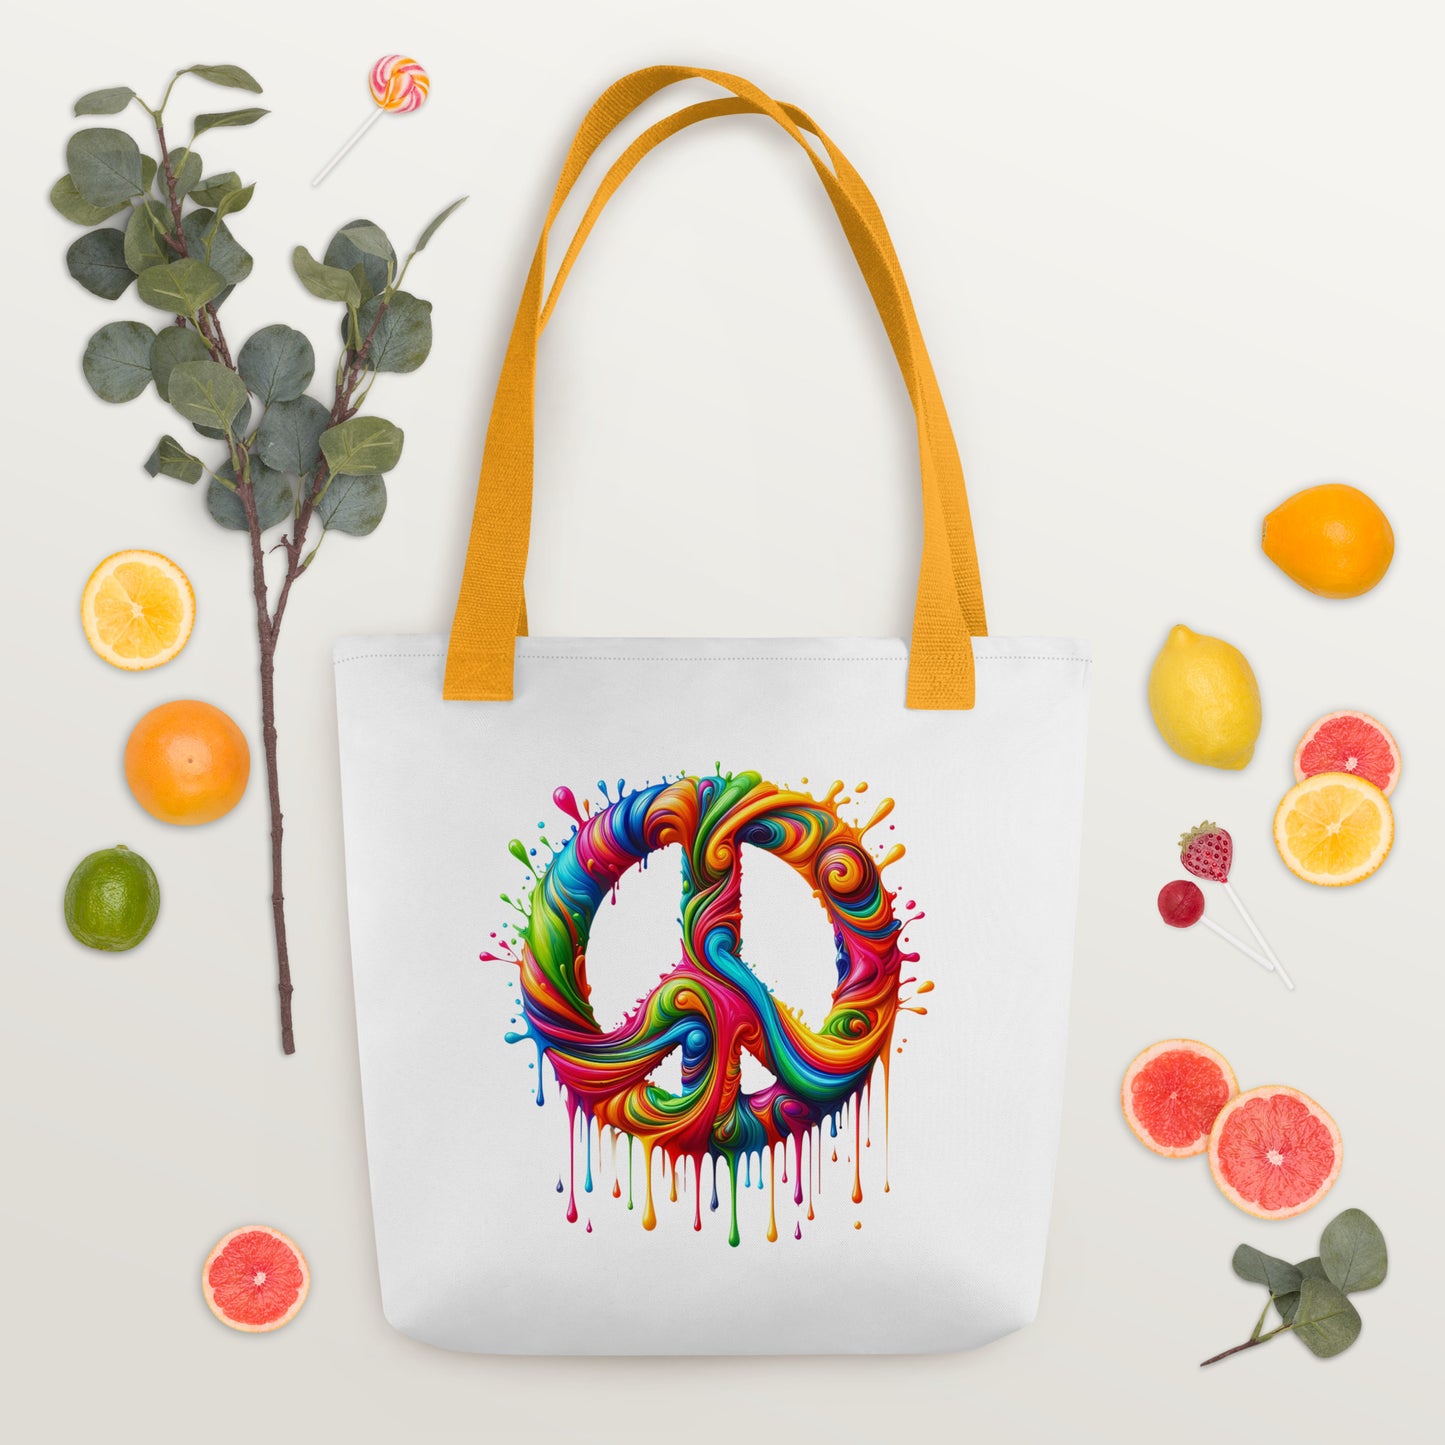 Dripping Colors of Peace Tote Bag